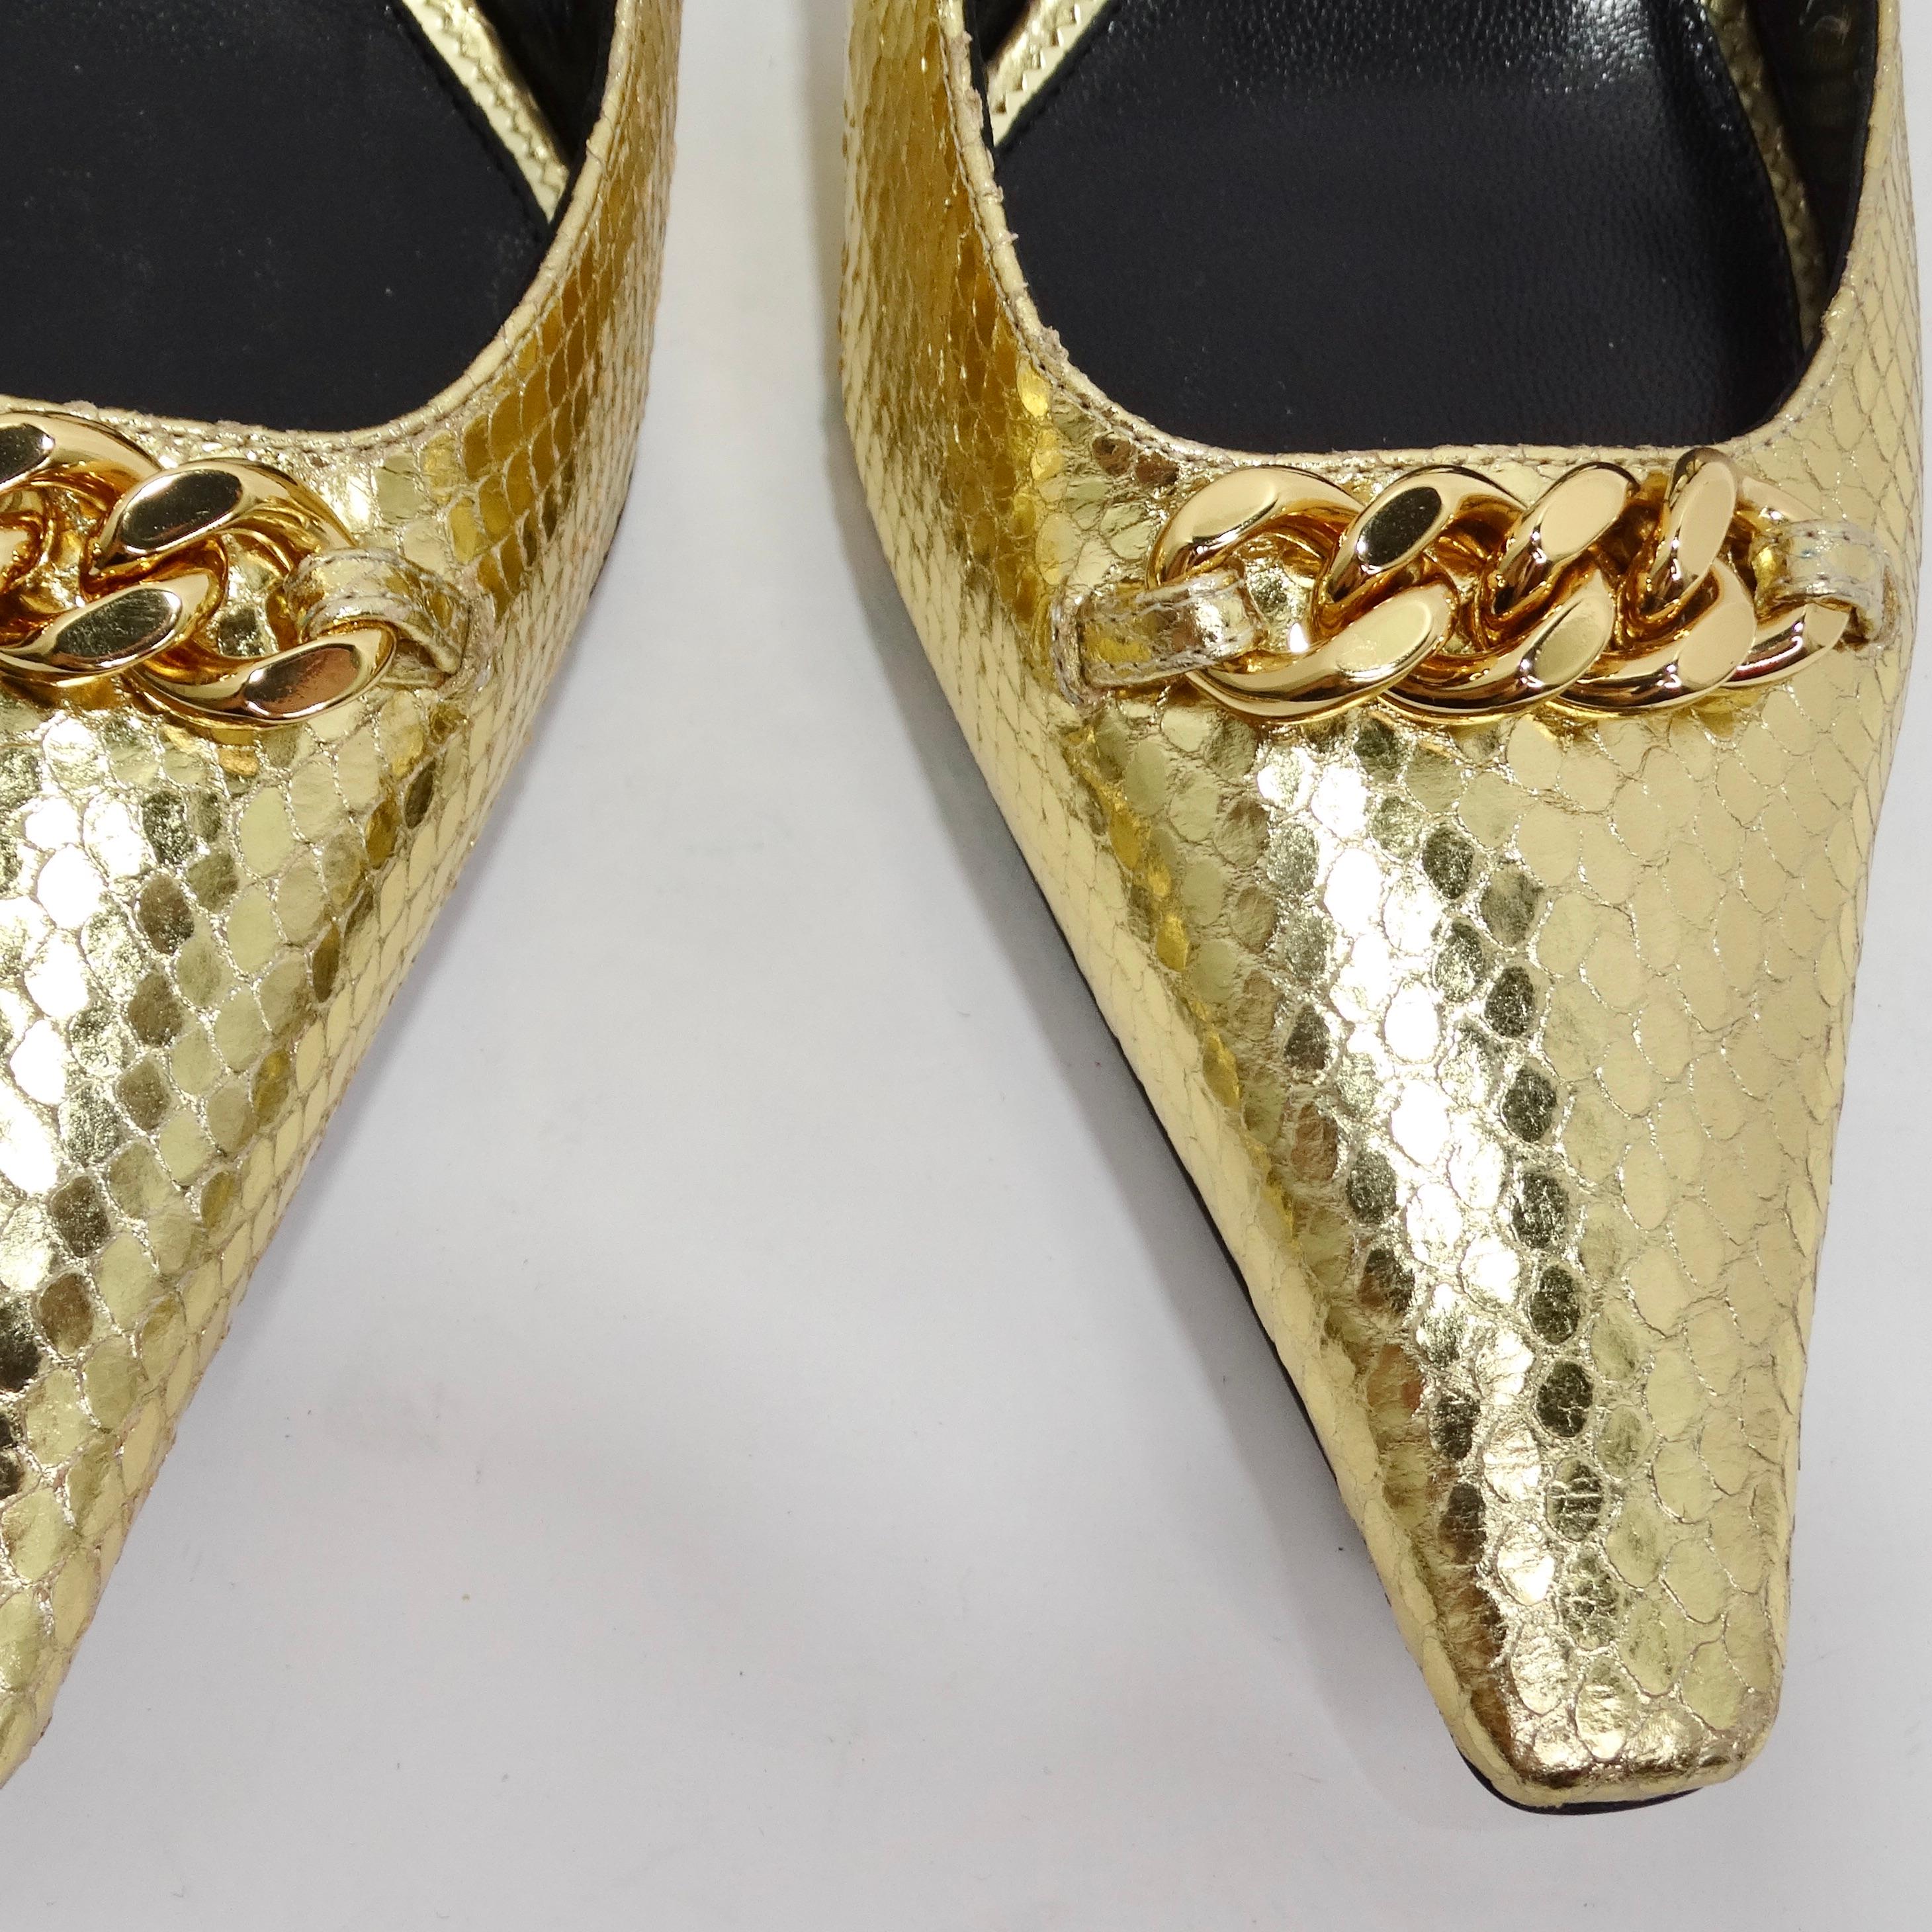 Tom Ford Gold Chain Link Slingback Pumps In Excellent Condition For Sale In Scottsdale, AZ